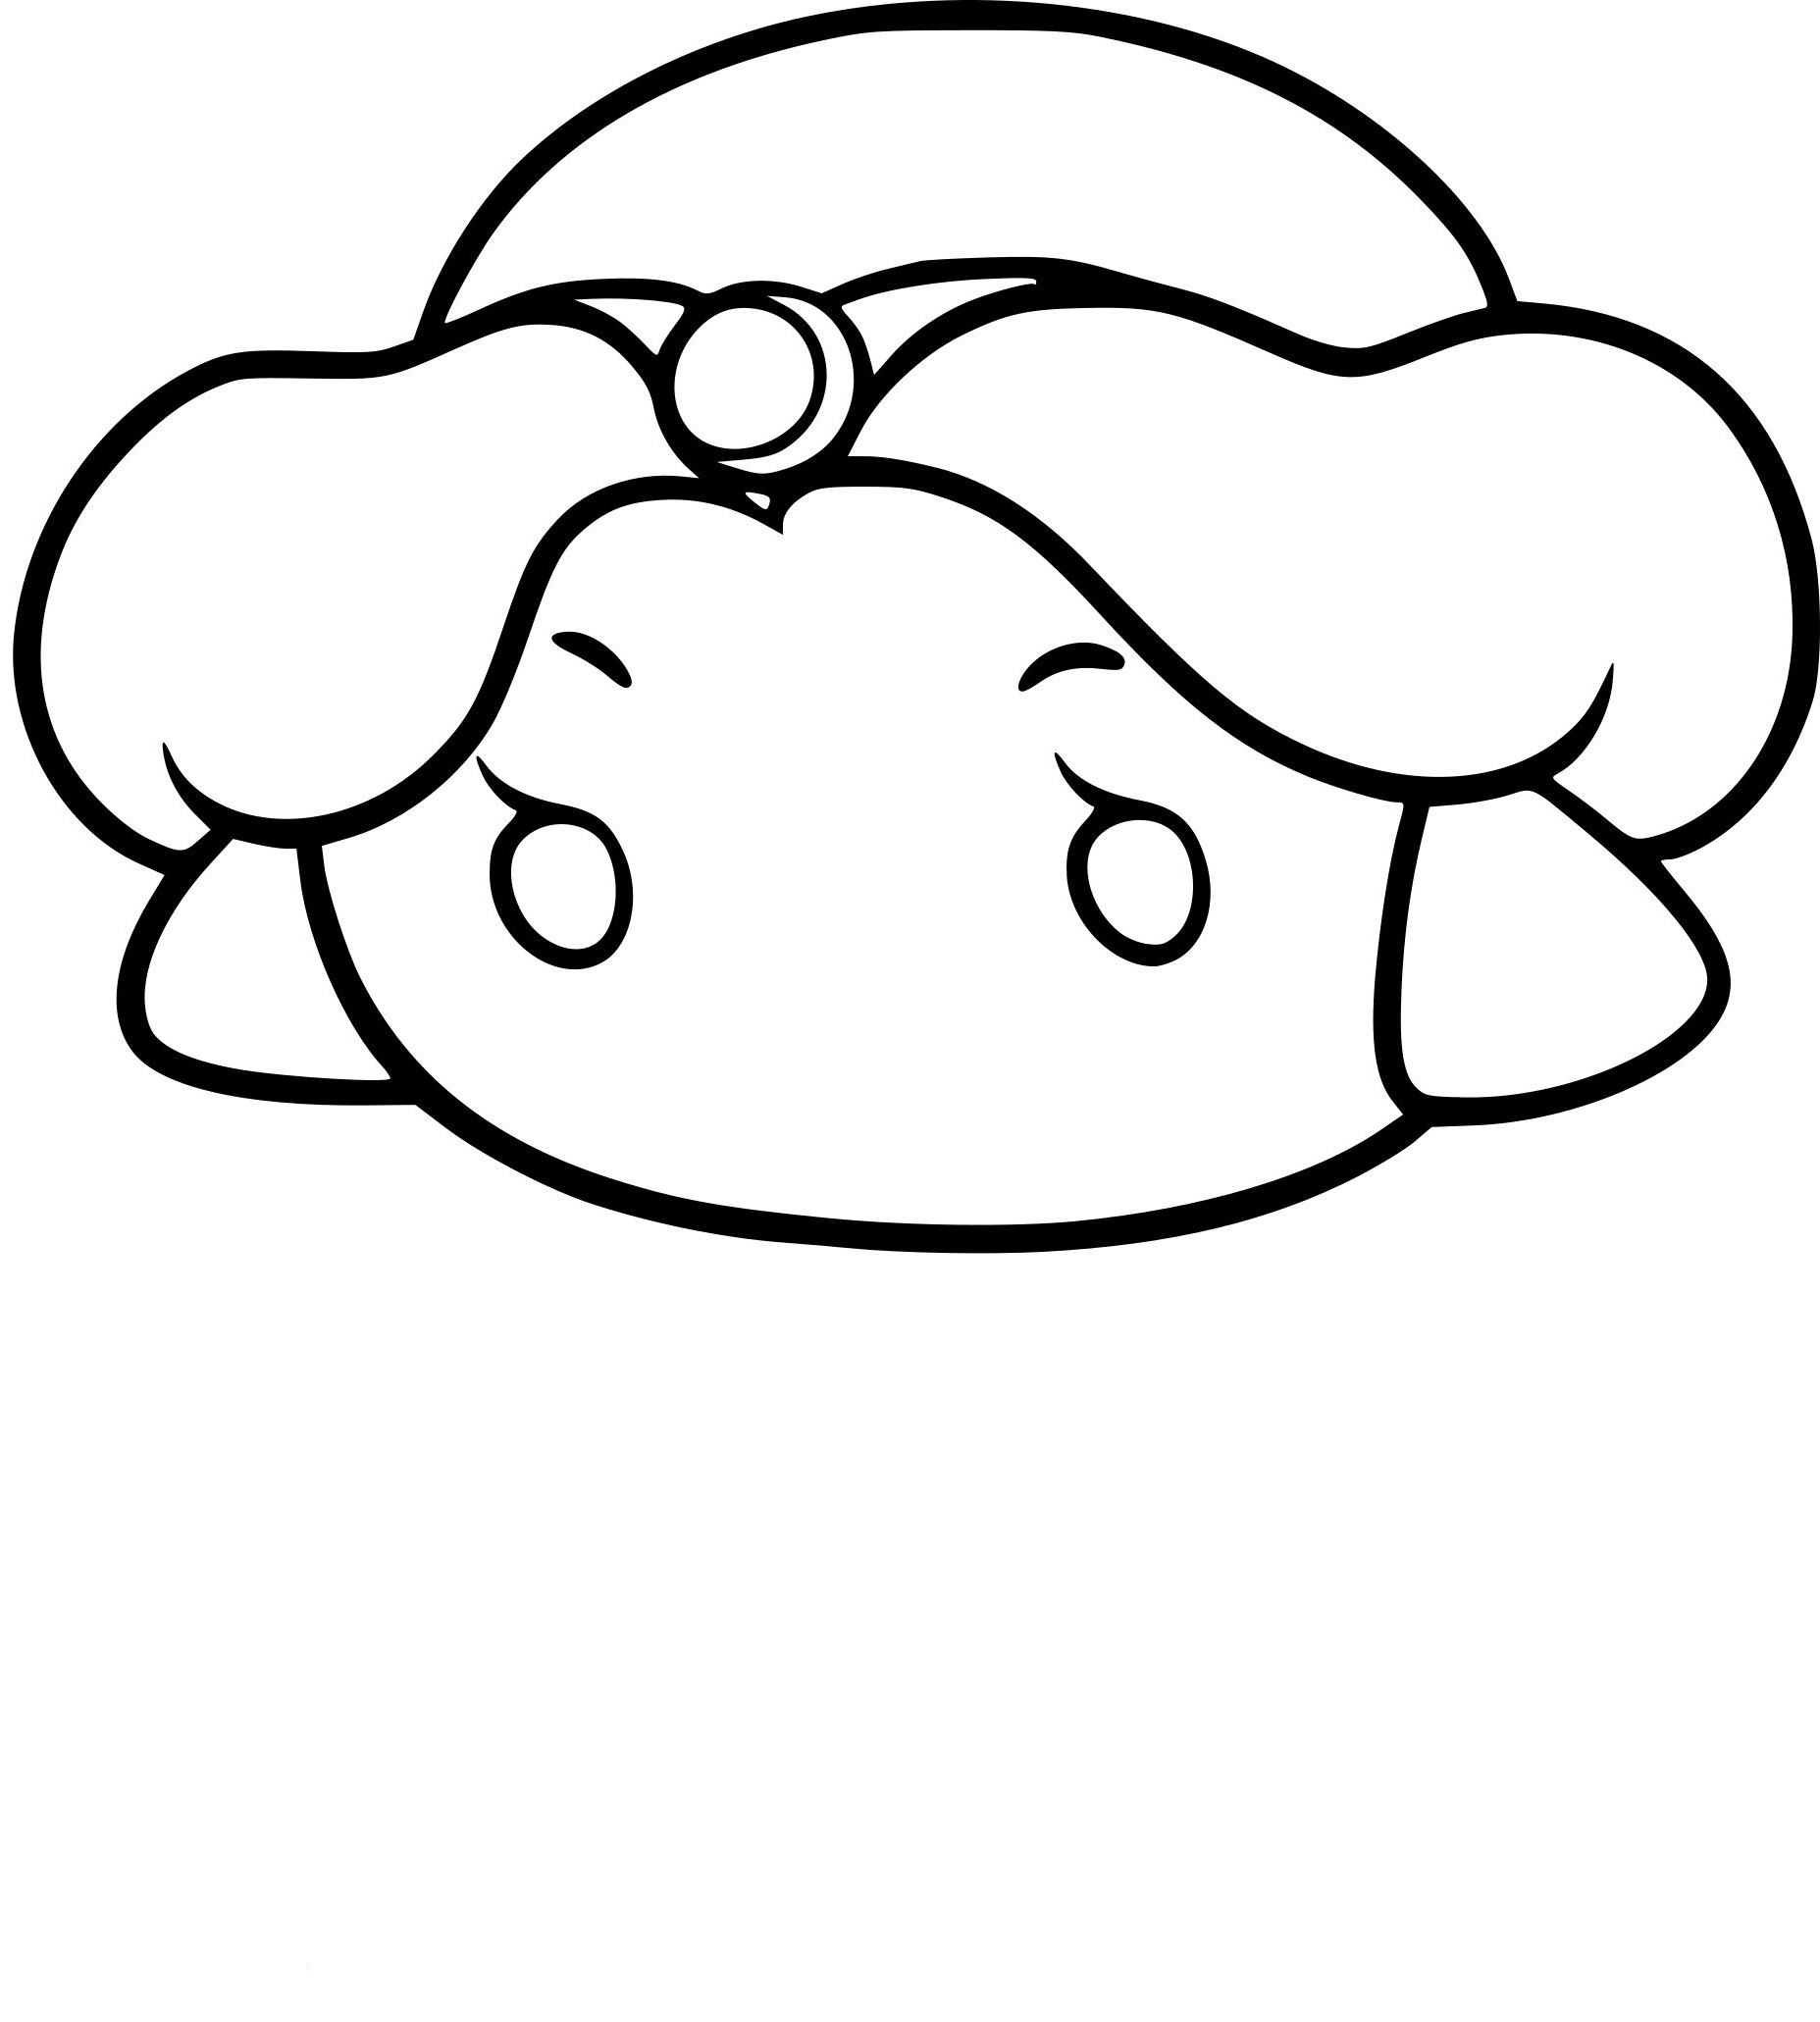 Coloriage Tsum Tsum A Imprimer Impressionnant Galerie Coloriage Tsum Tsum Elsa À Imprimer Sur Coloriages with